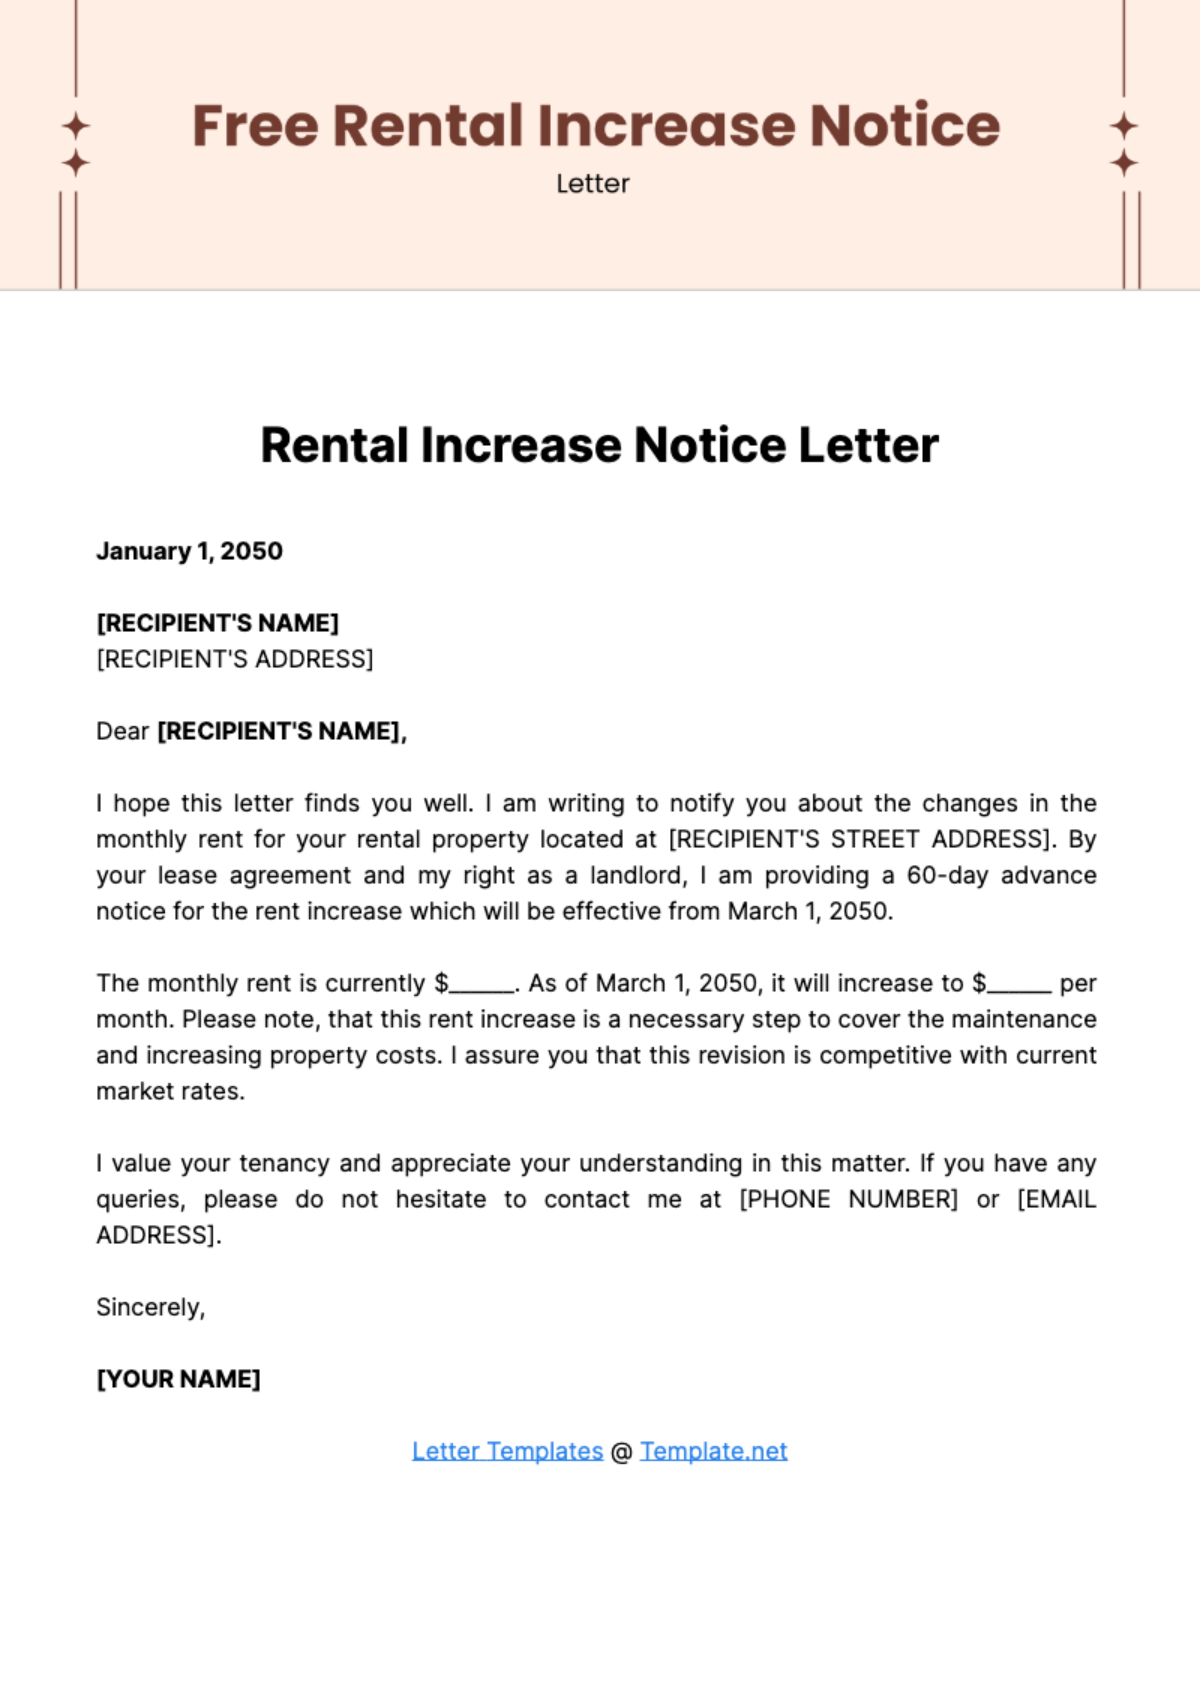 Free Rental Increase Notice Letter Template